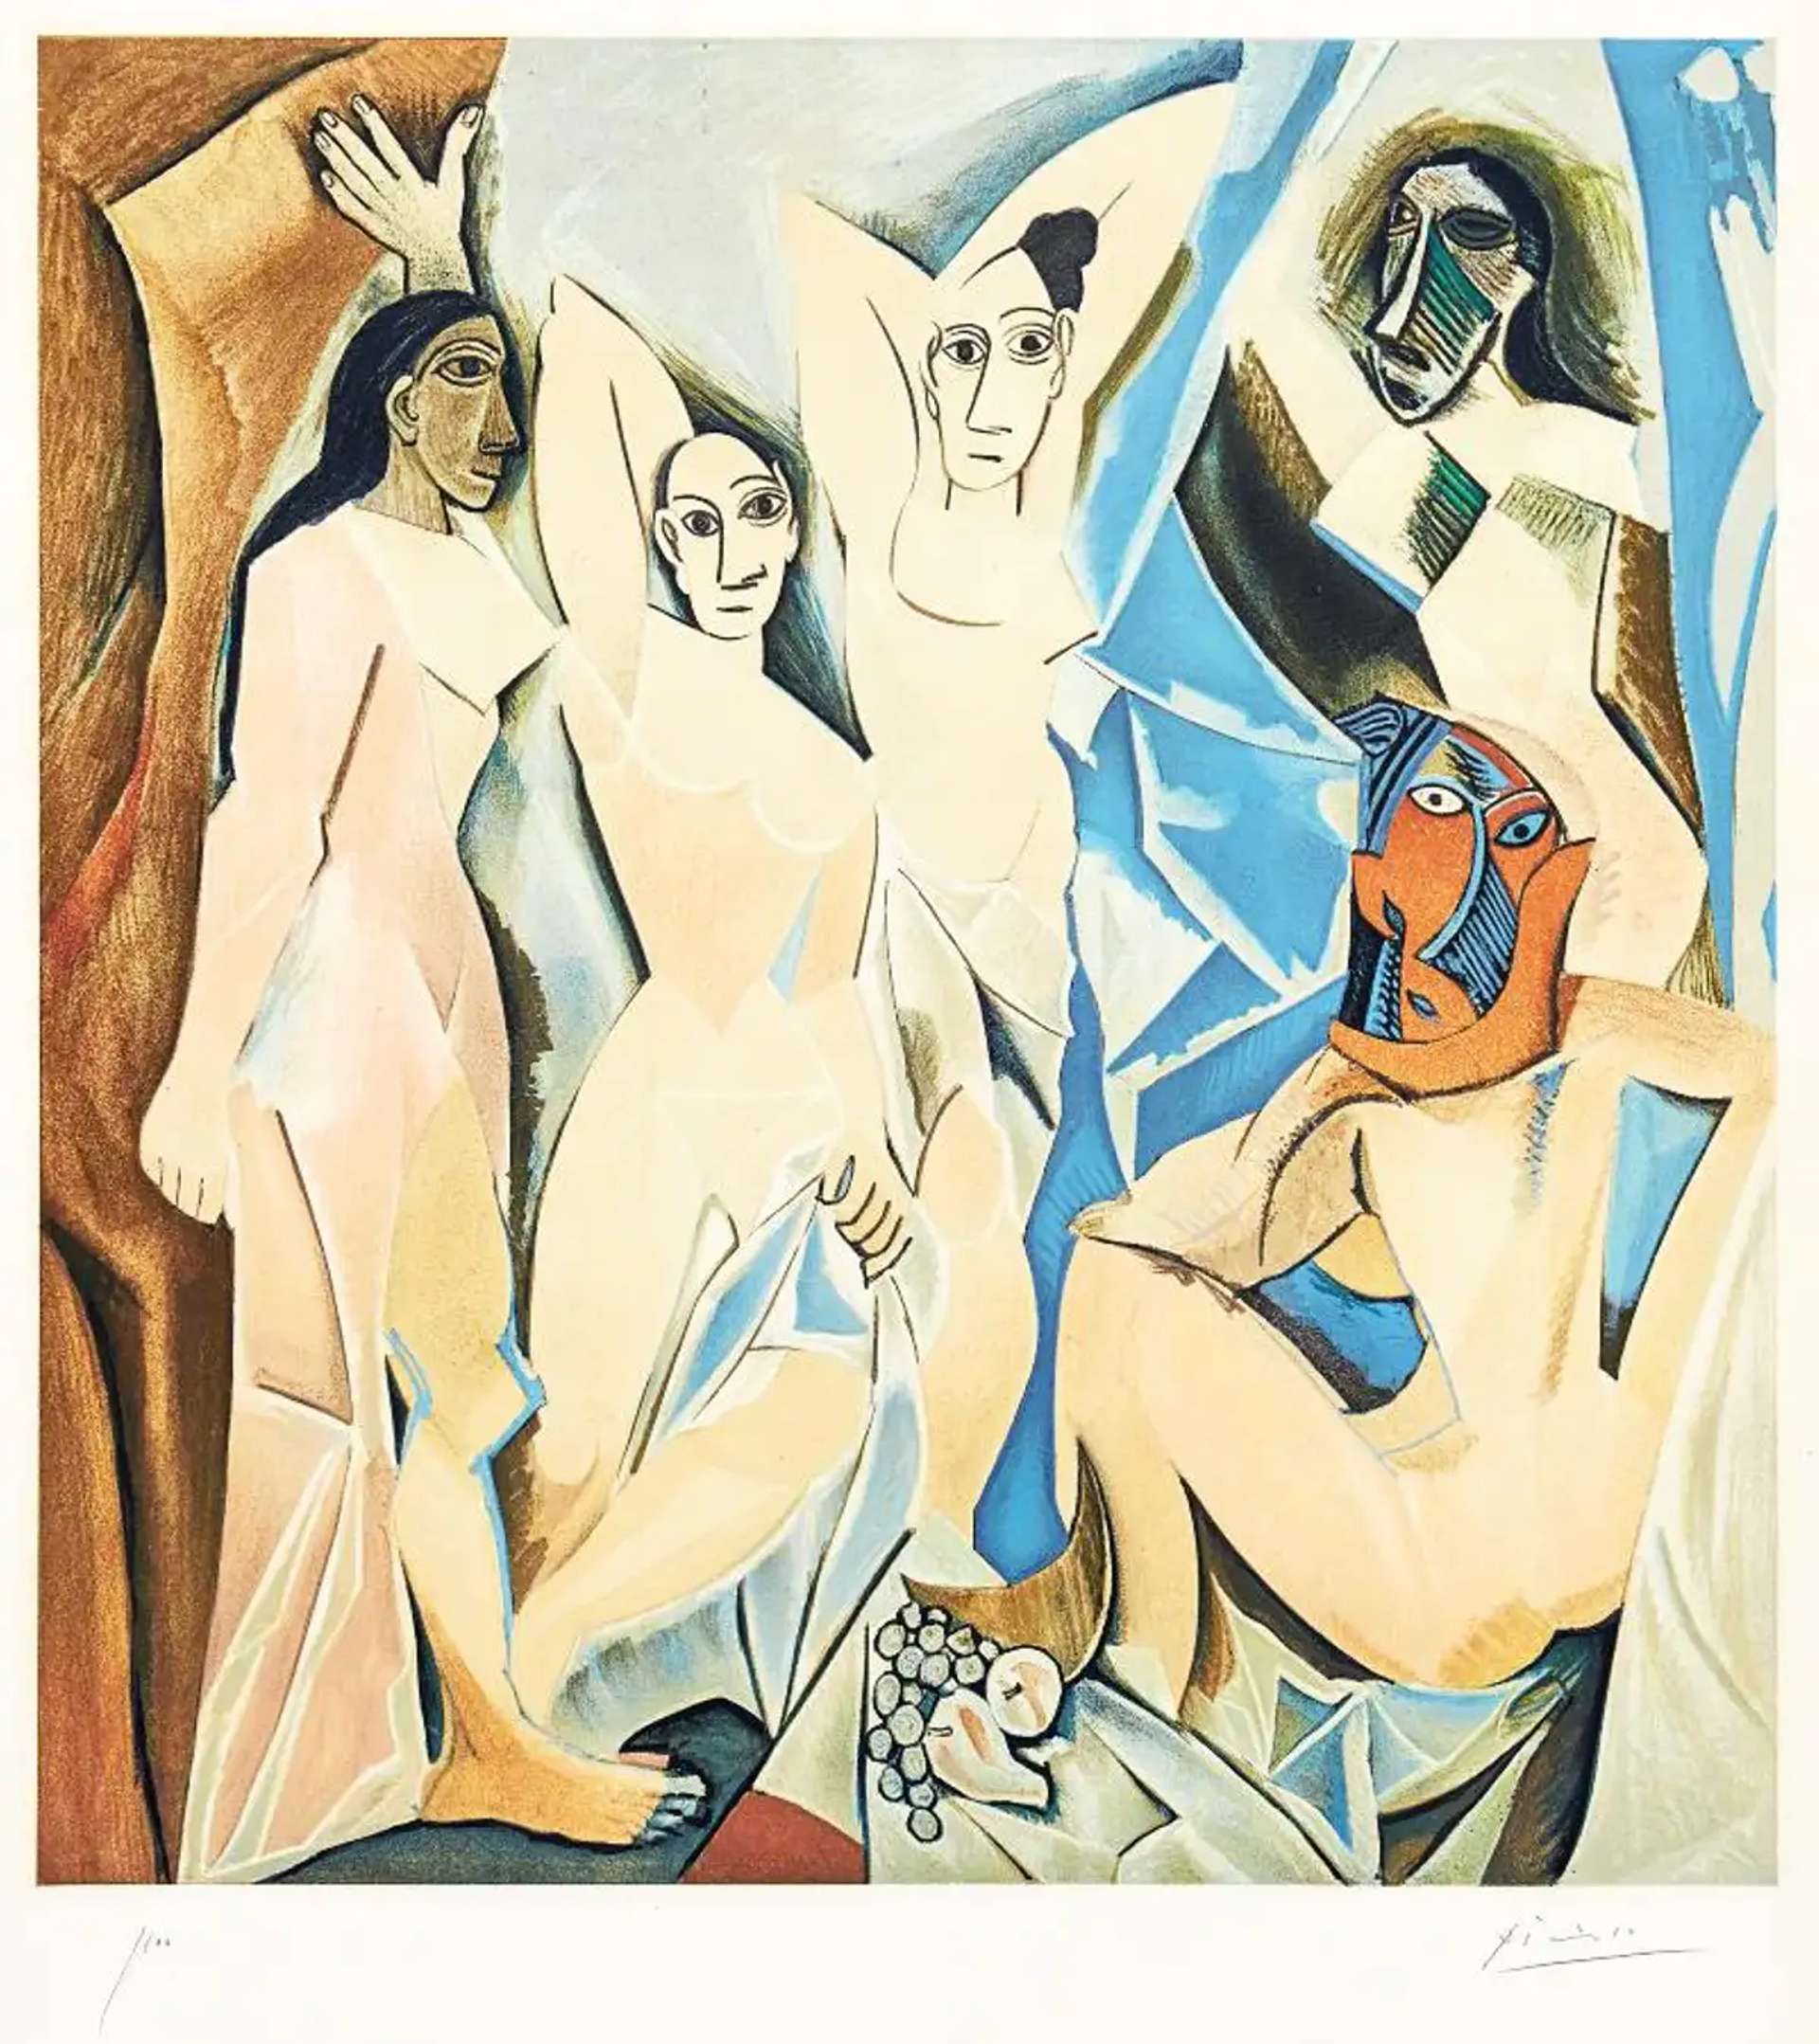 Pablo Picasso’s Les Demoiselles Avignon. A lithograph of a Cubist painting depicting five nude women in a room with draped sheets. A bowl of fruit is on the floor in the centre of the women.